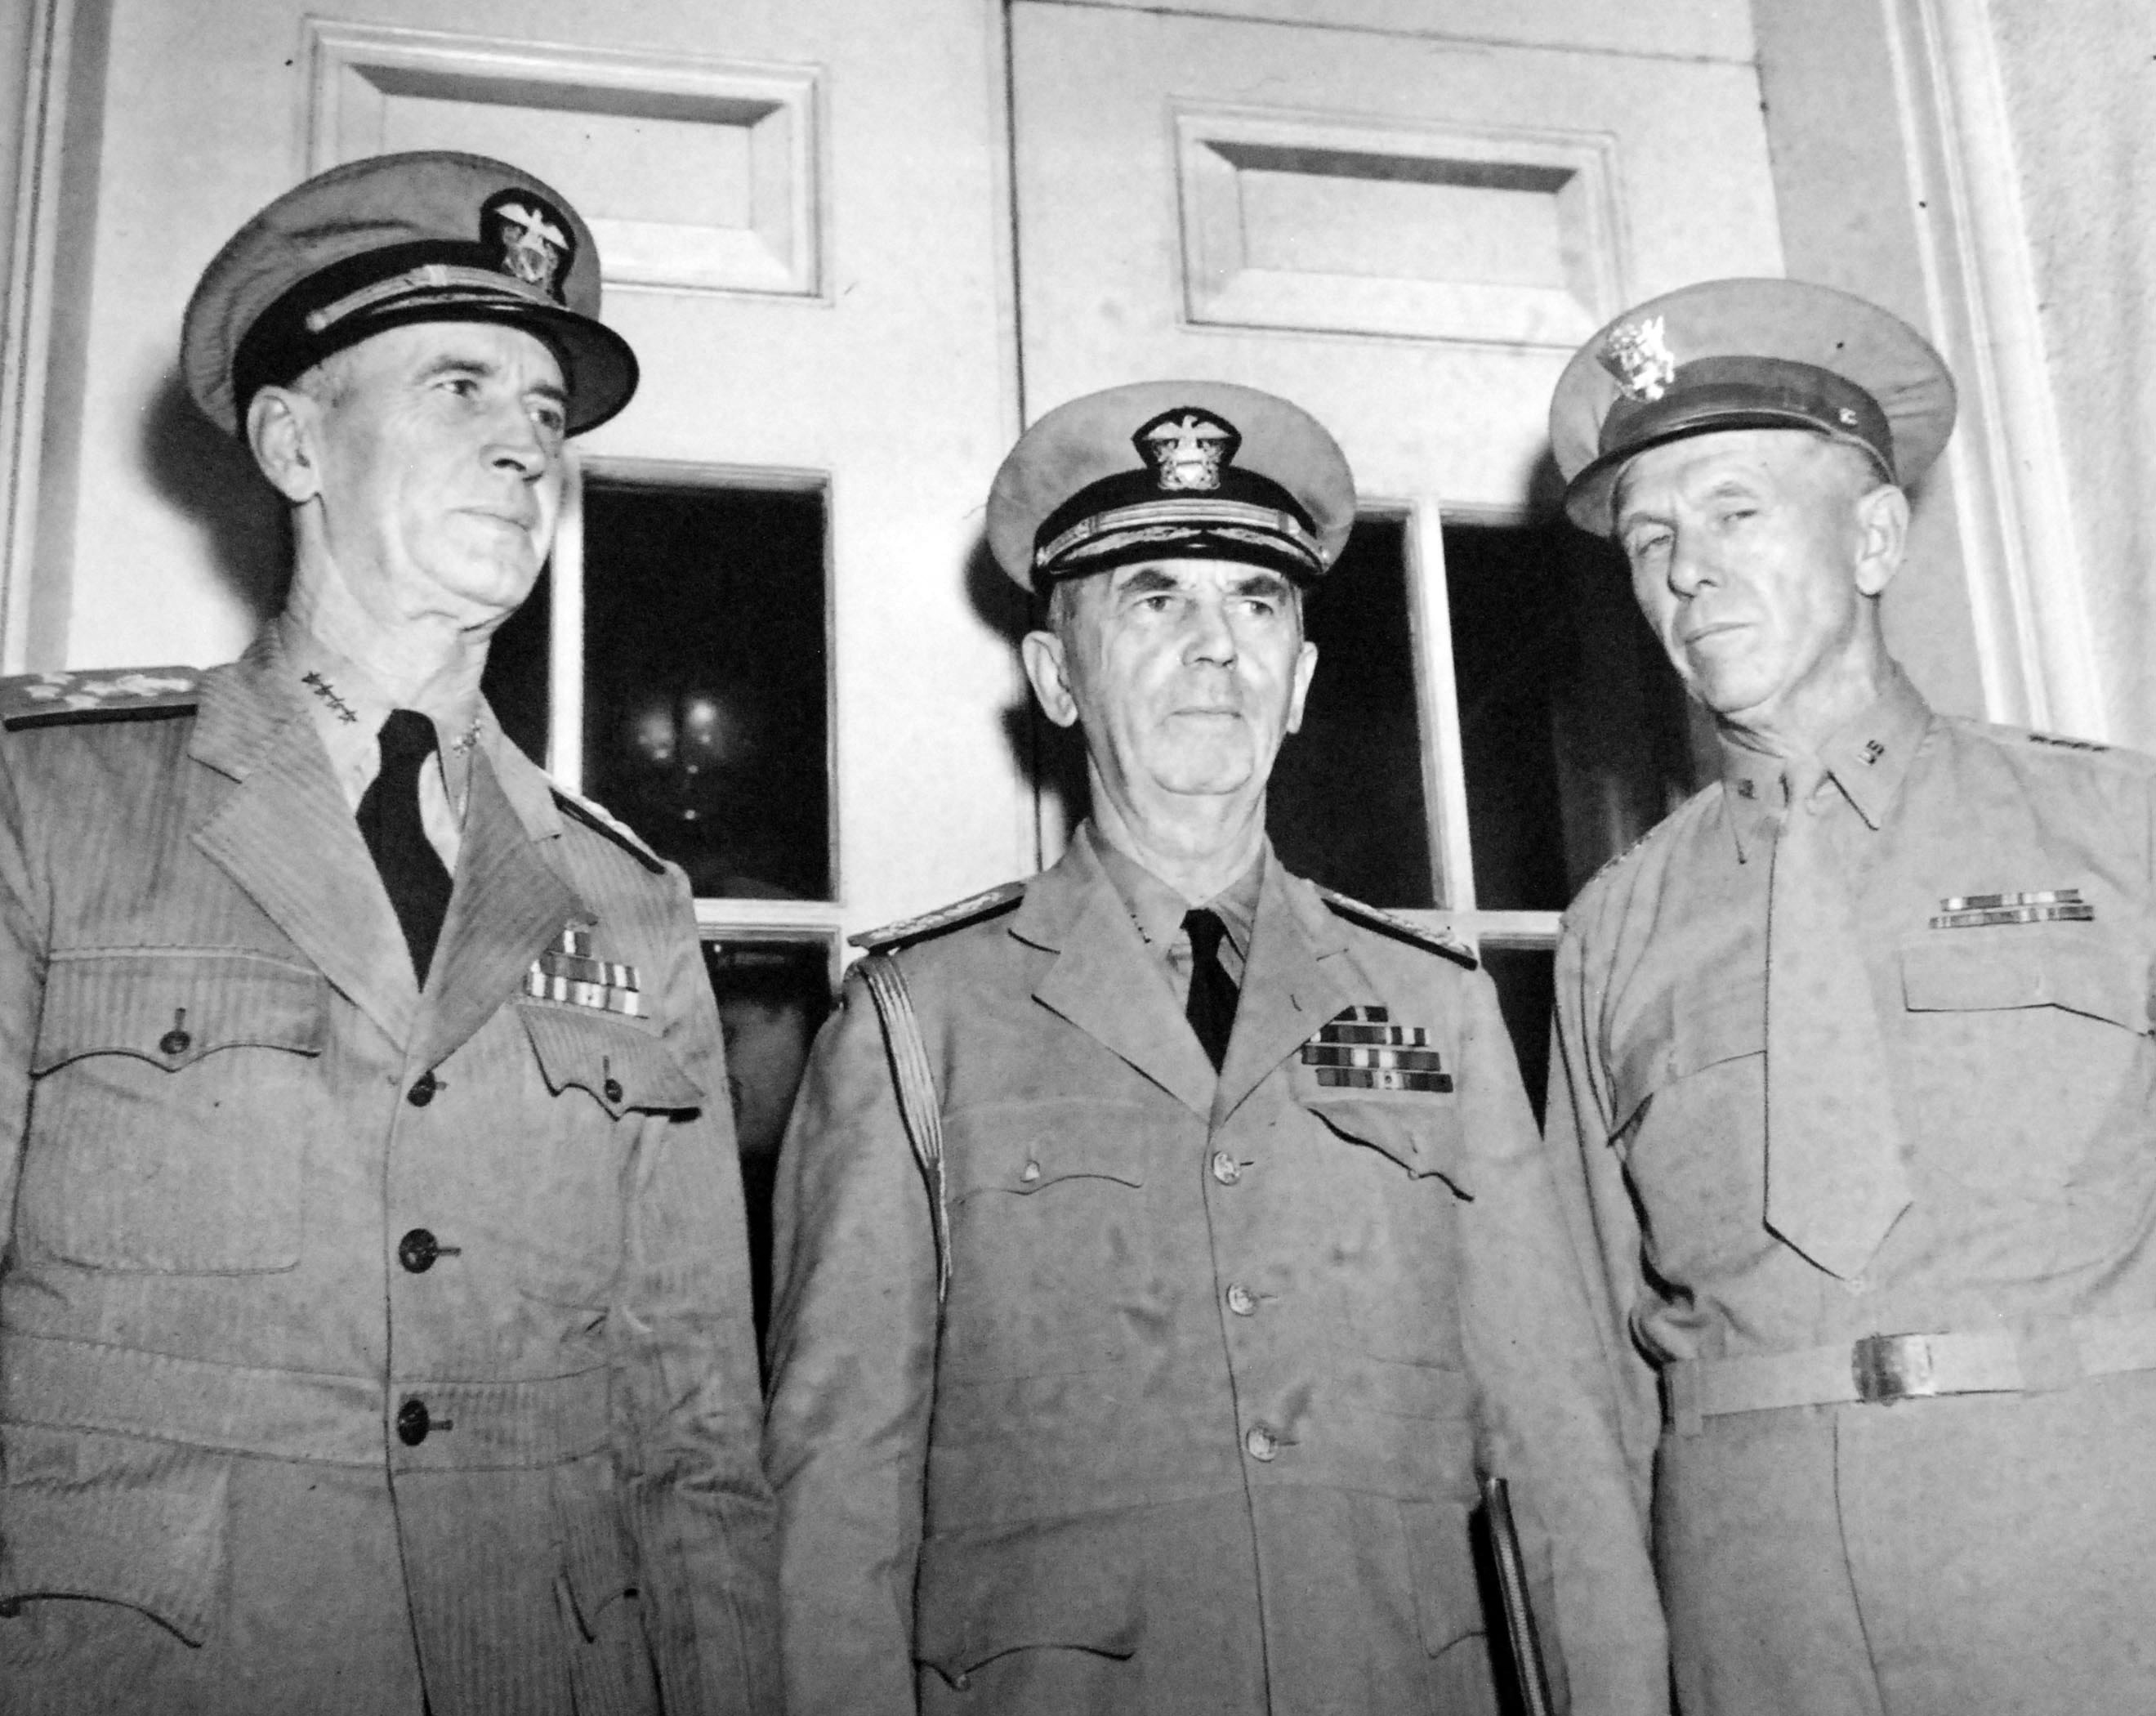 Admiral Ernest King, Chief of Naval Operations; Admiral William Leahy, Chief of Staff to the President; and General George Marshall, Army Chief of Staff at the White House, Washington DC, United States, 28 Jul 1942.